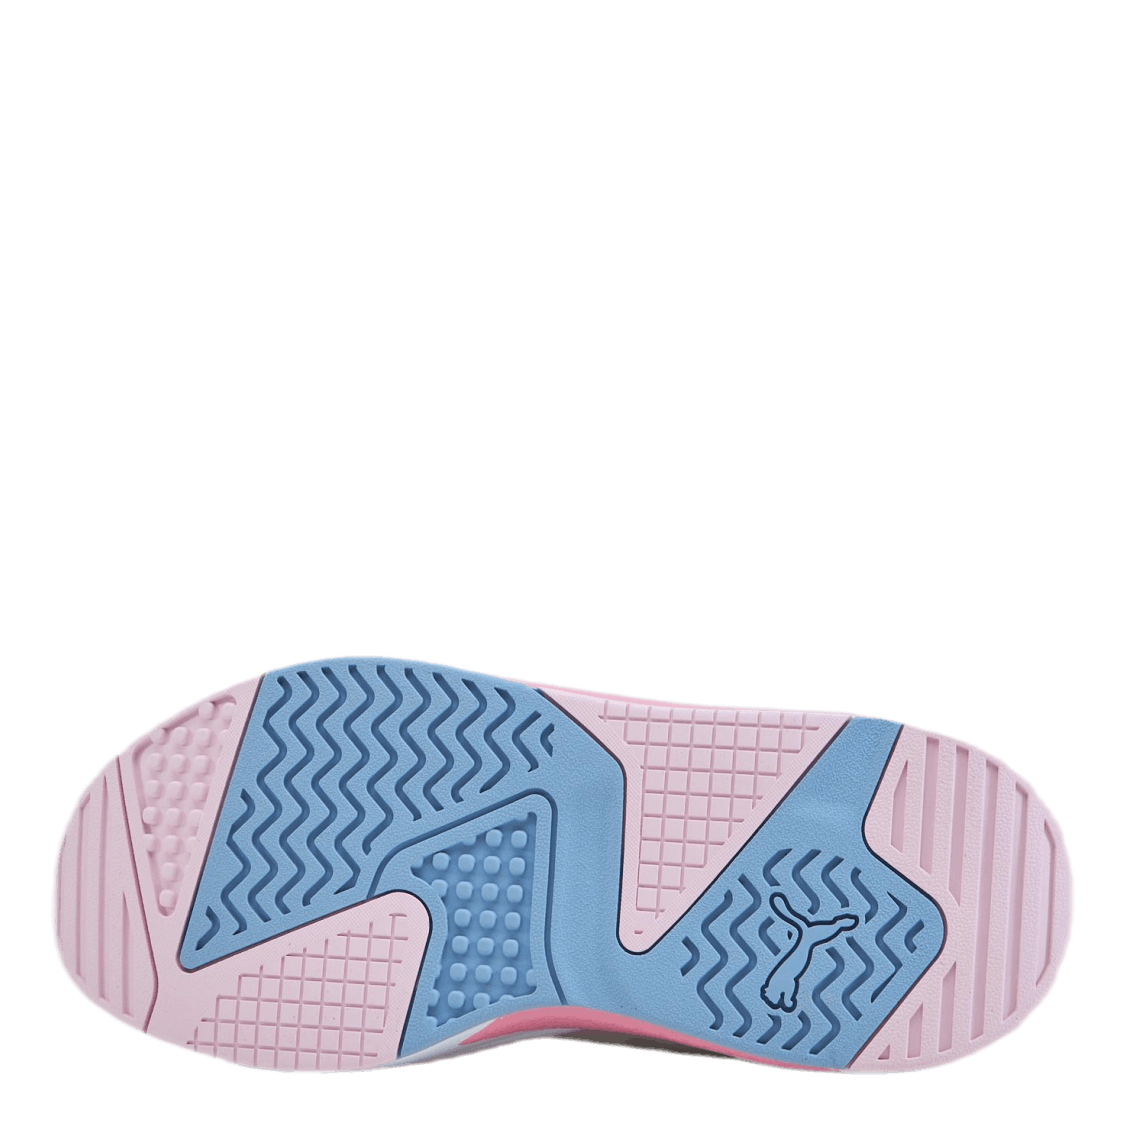 X-Ray 2 Square Junior Pink/White